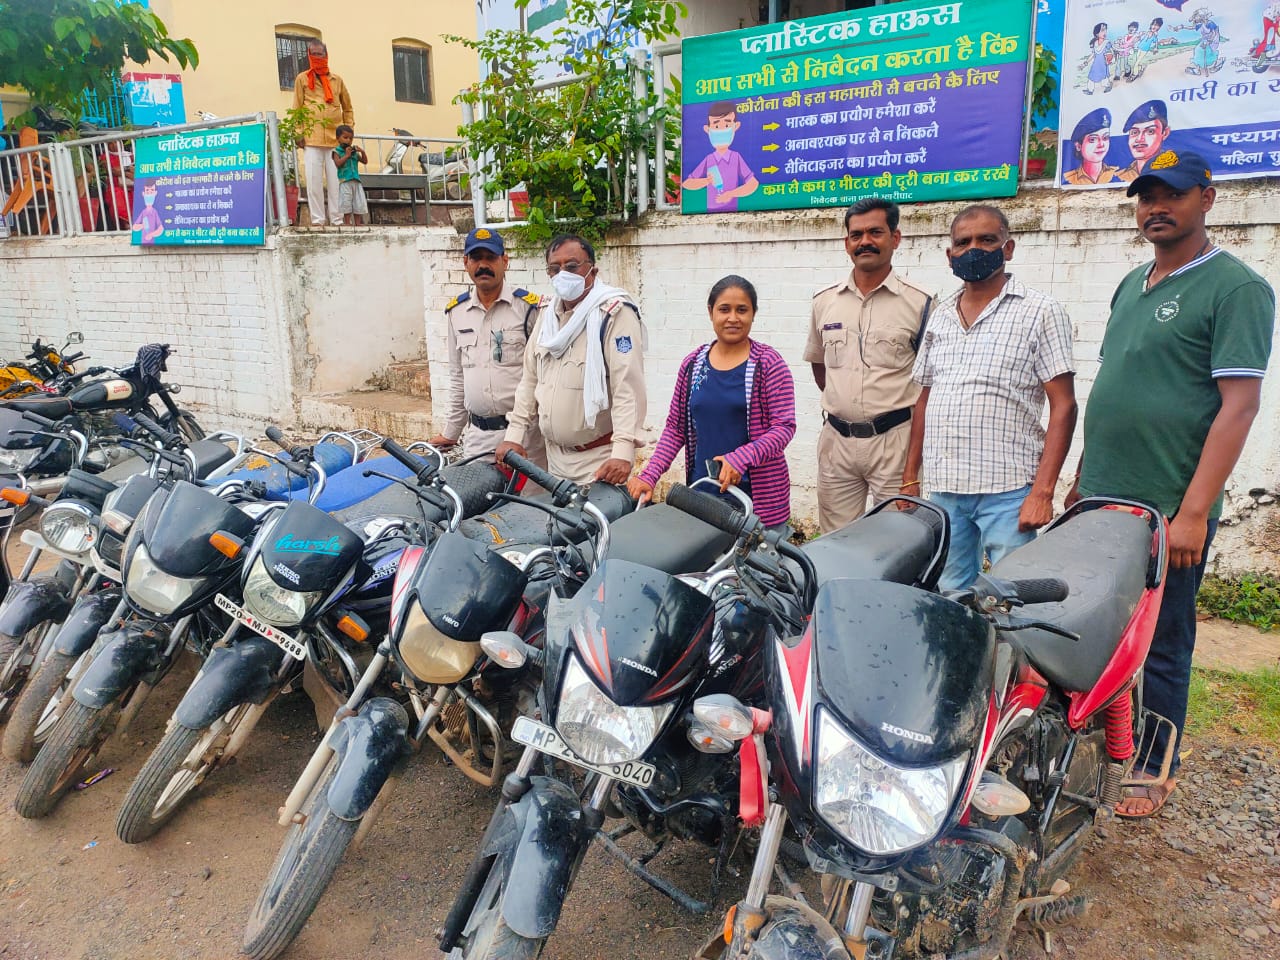 Police recovered 8 bikes